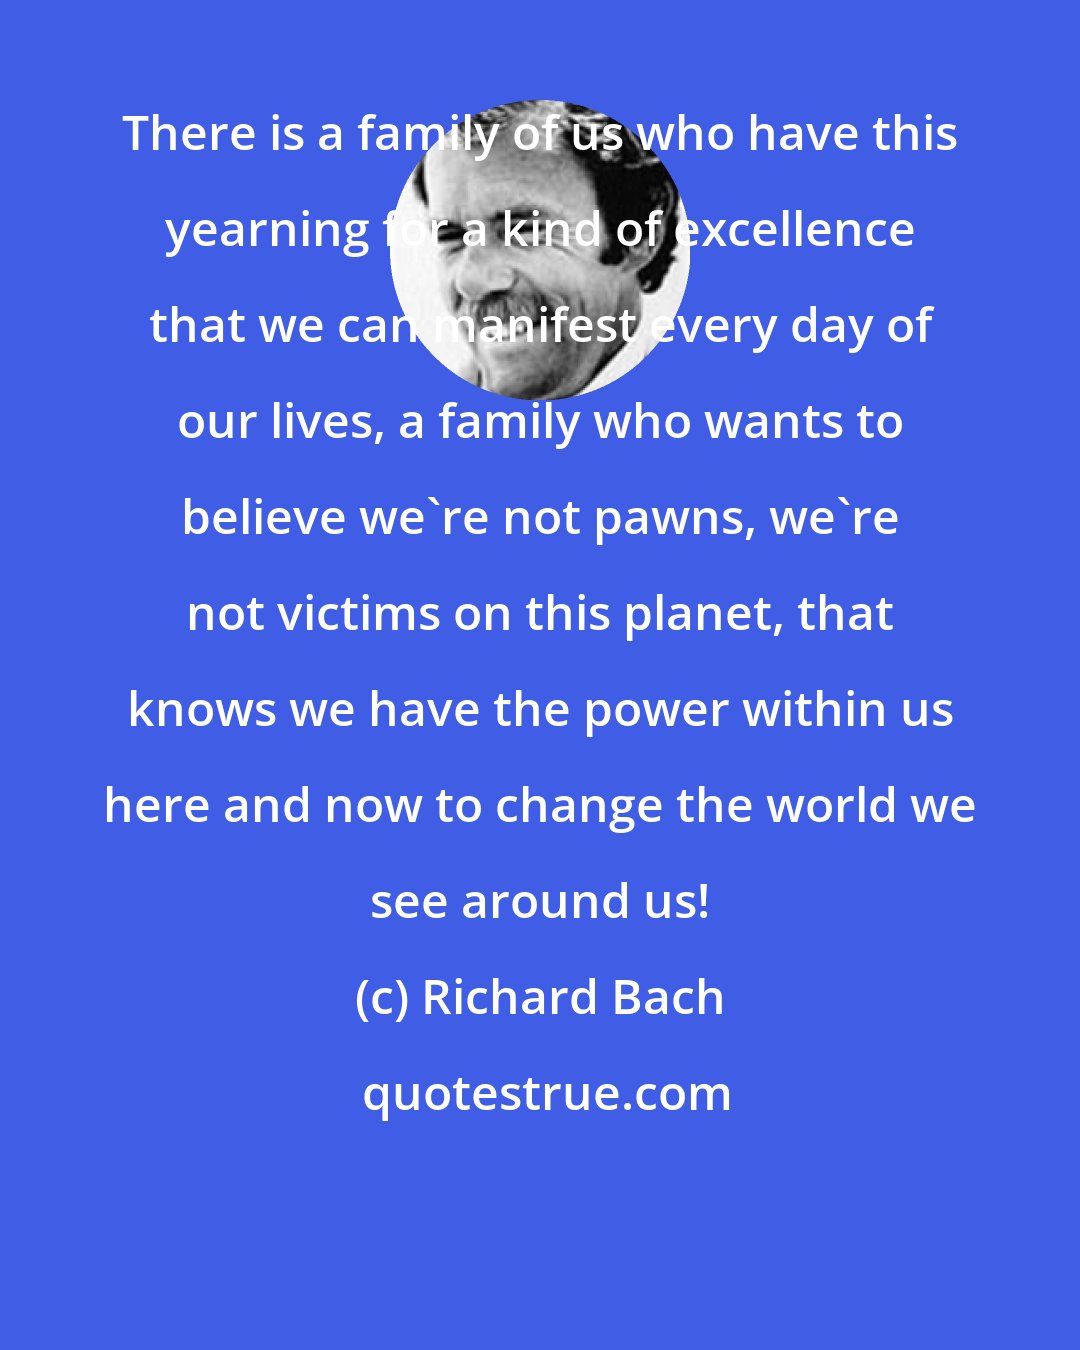 Richard Bach: There is a family of us who have this yearning for a kind of excellence that we can manifest every day of our lives, a family who wants to believe we're not pawns, we're not victims on this planet, that knows we have the power within us here and now to change the world we see around us!